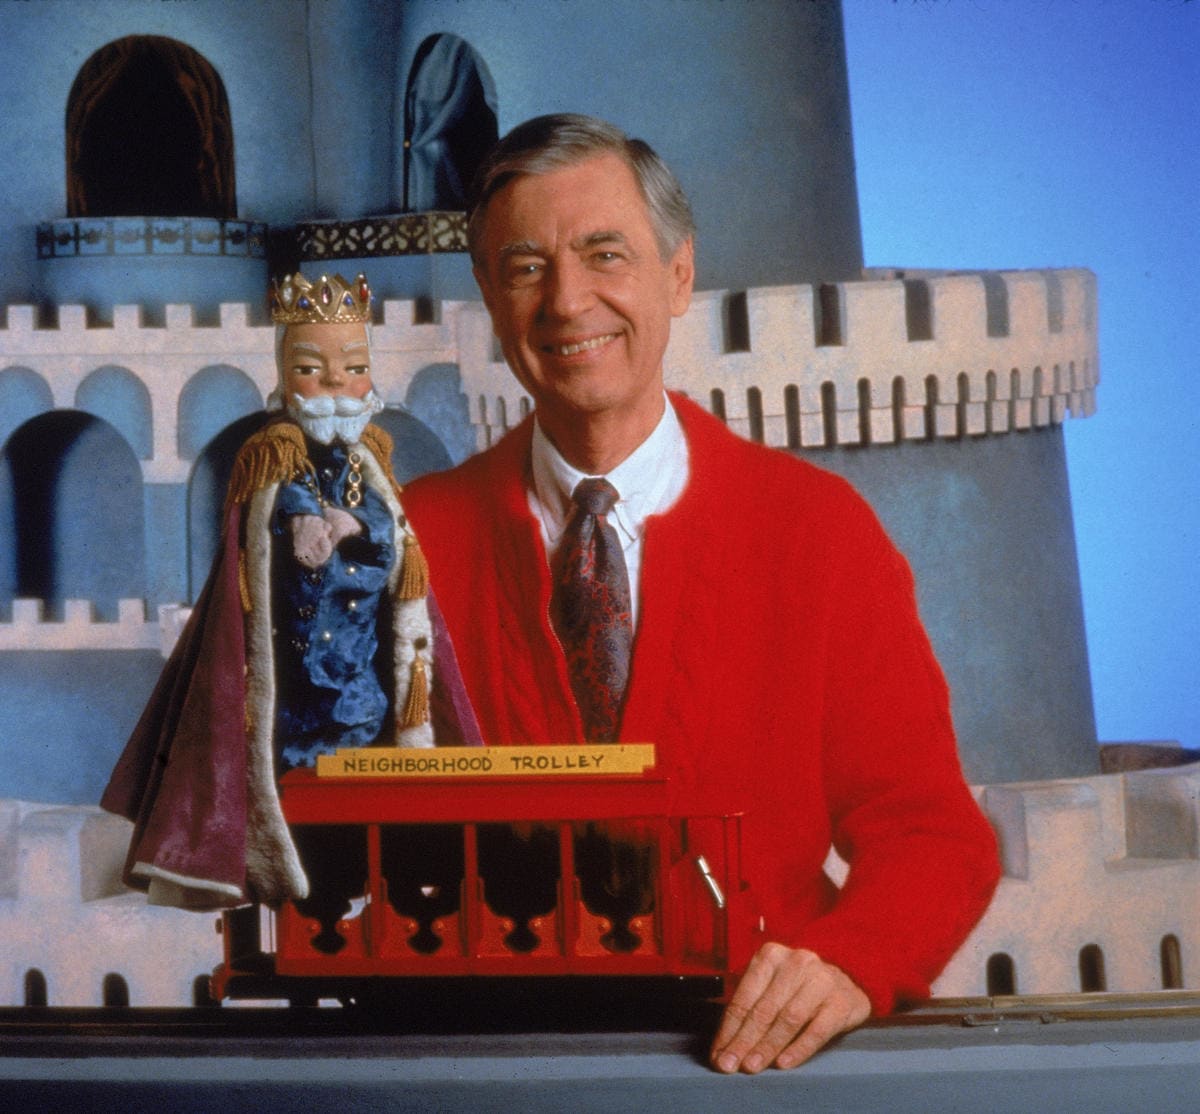 On this day, 96 yrs. ago, a wonderful person was born. It's such an honor to share his message of kindness in Mister Rogers' Gift of Music! To celebrate, I'm doing a PB critique #giveaway for 1 non-rhyme PB. Follow/RT & tag a friend to enter. @PageStreetKids @amandacalatzis